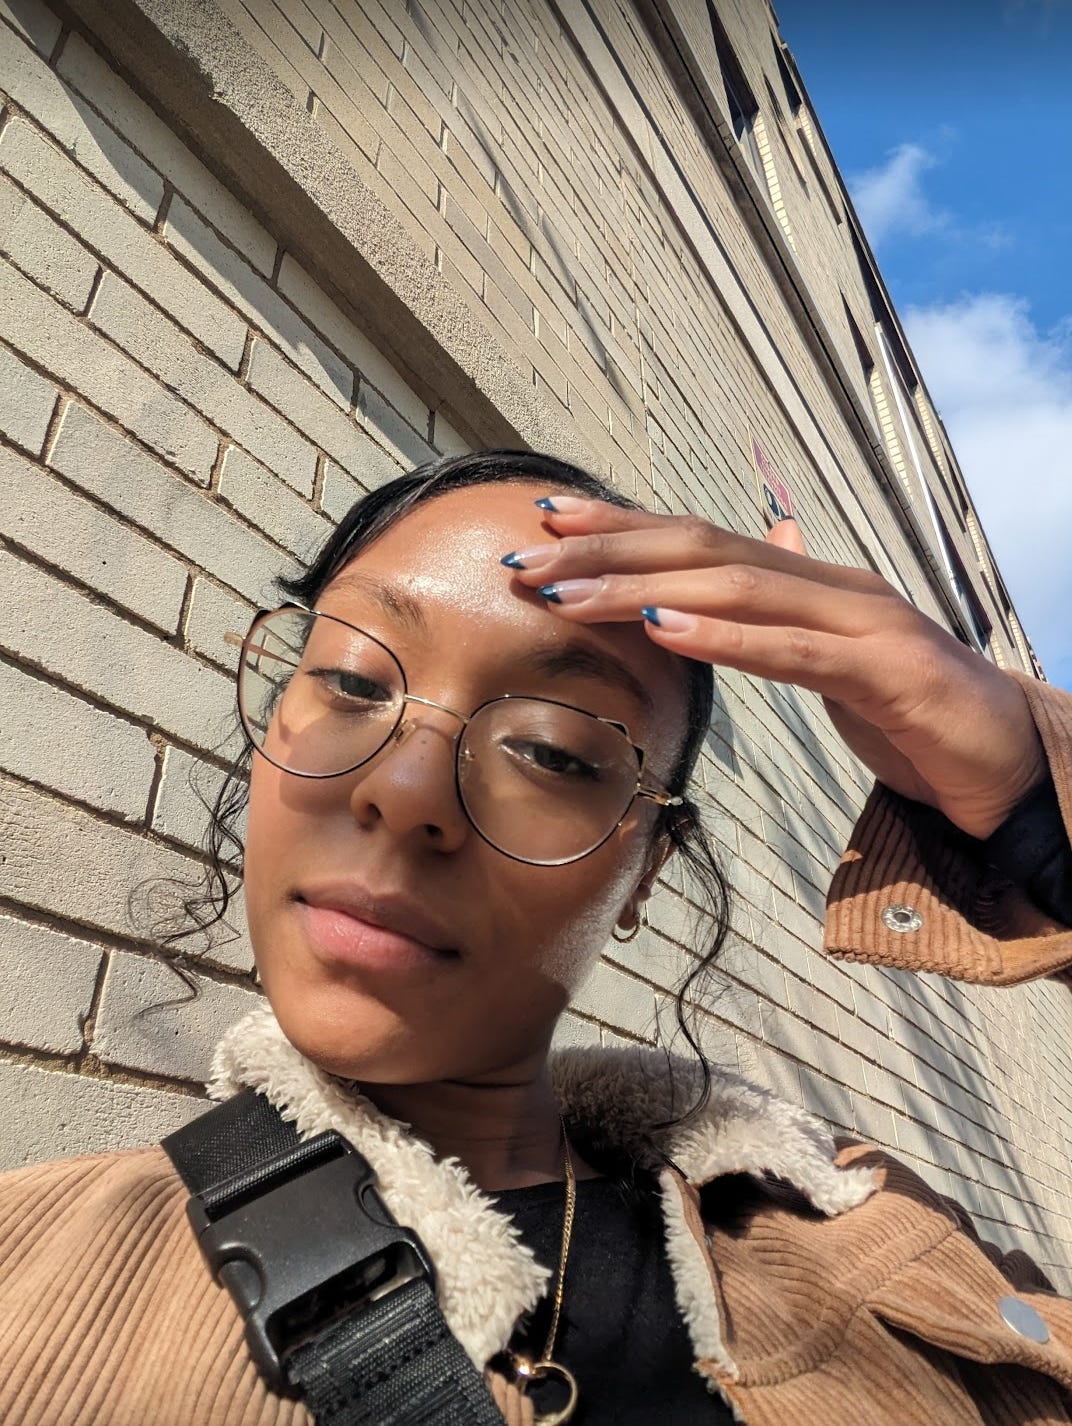  Nathalie takes a selfie showing her glowing brown skin during a very sunny day. She places her hand on her forehead to show off her navy blue french tip gel nails. She has curly strands of her sticking out on either side of her ears to frame her face. She has cat shaped rim glasses, a tan corduroy jacket and a gold necklace peeking out.